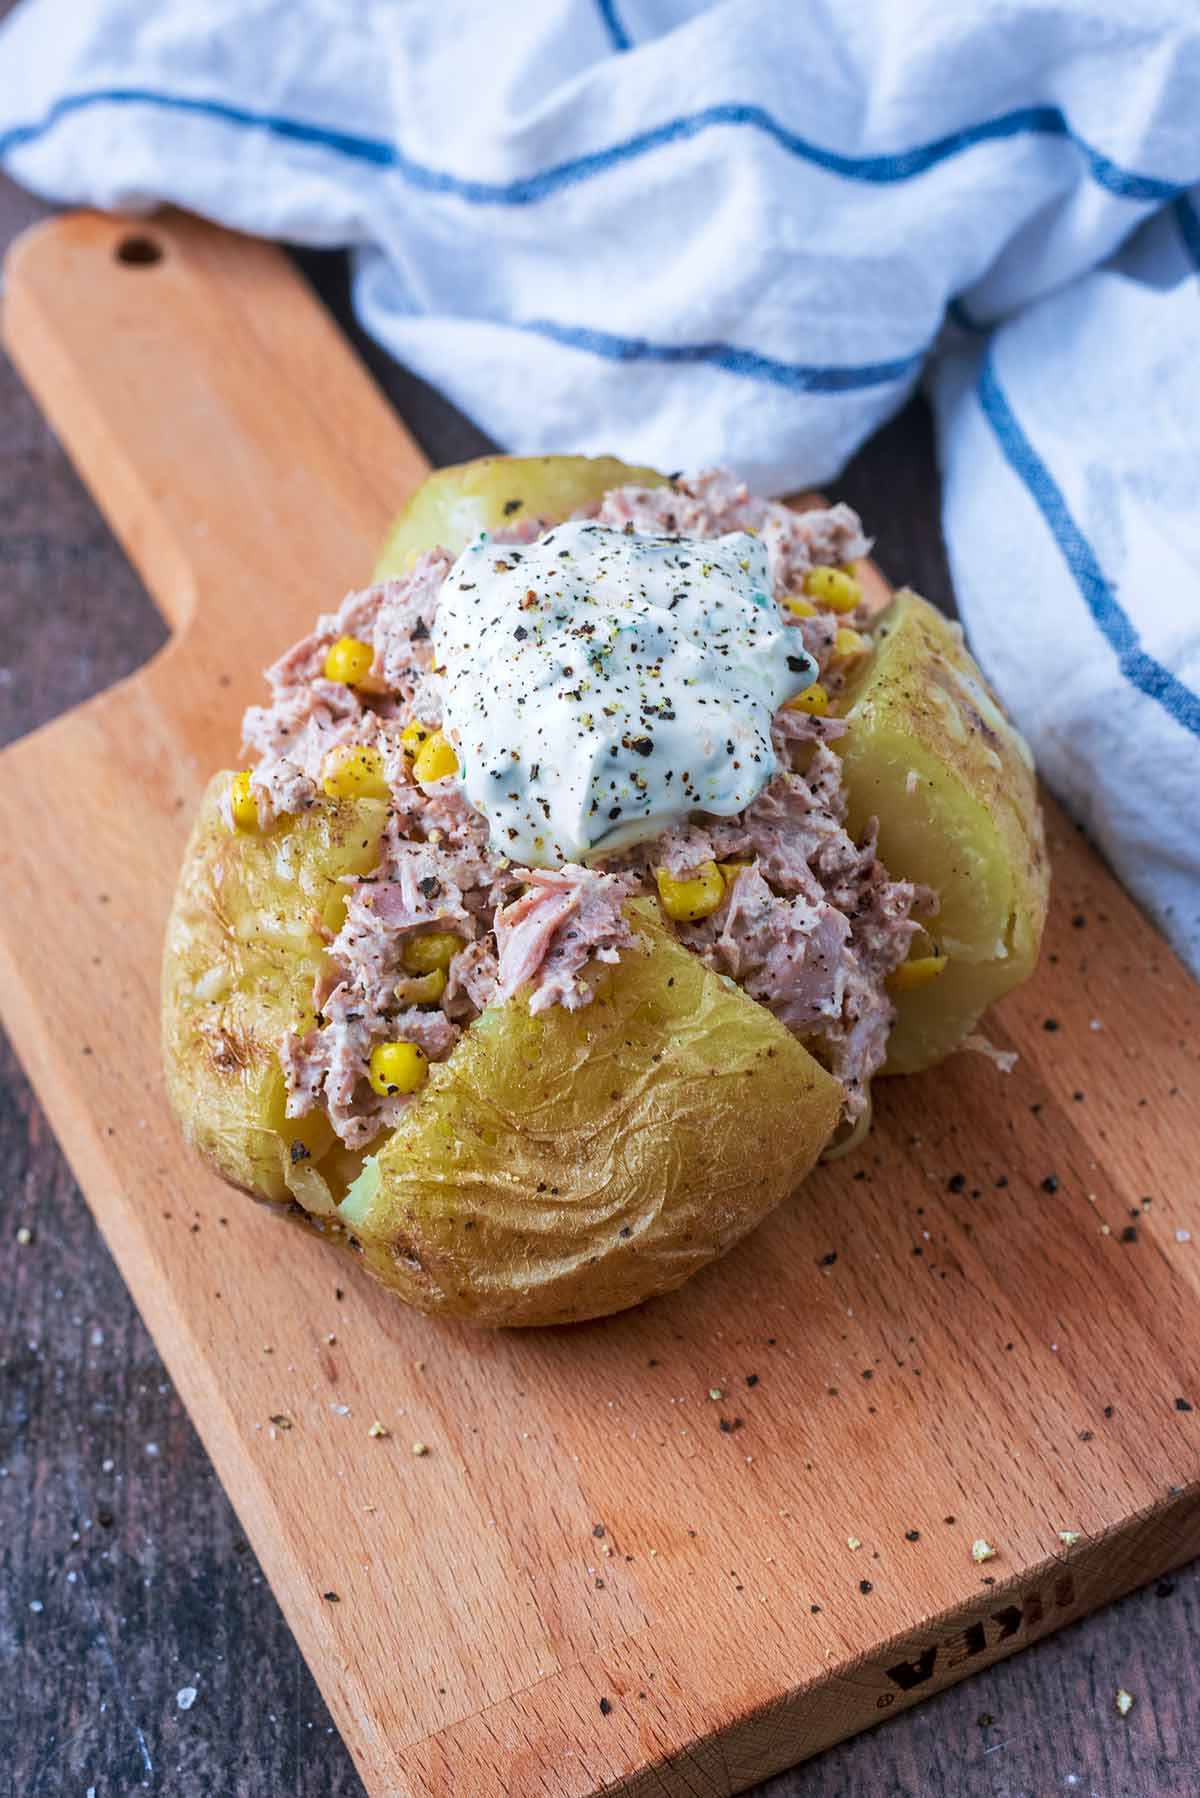 A jacket potato cut open filled with tuna mayo and topped with sour cream.